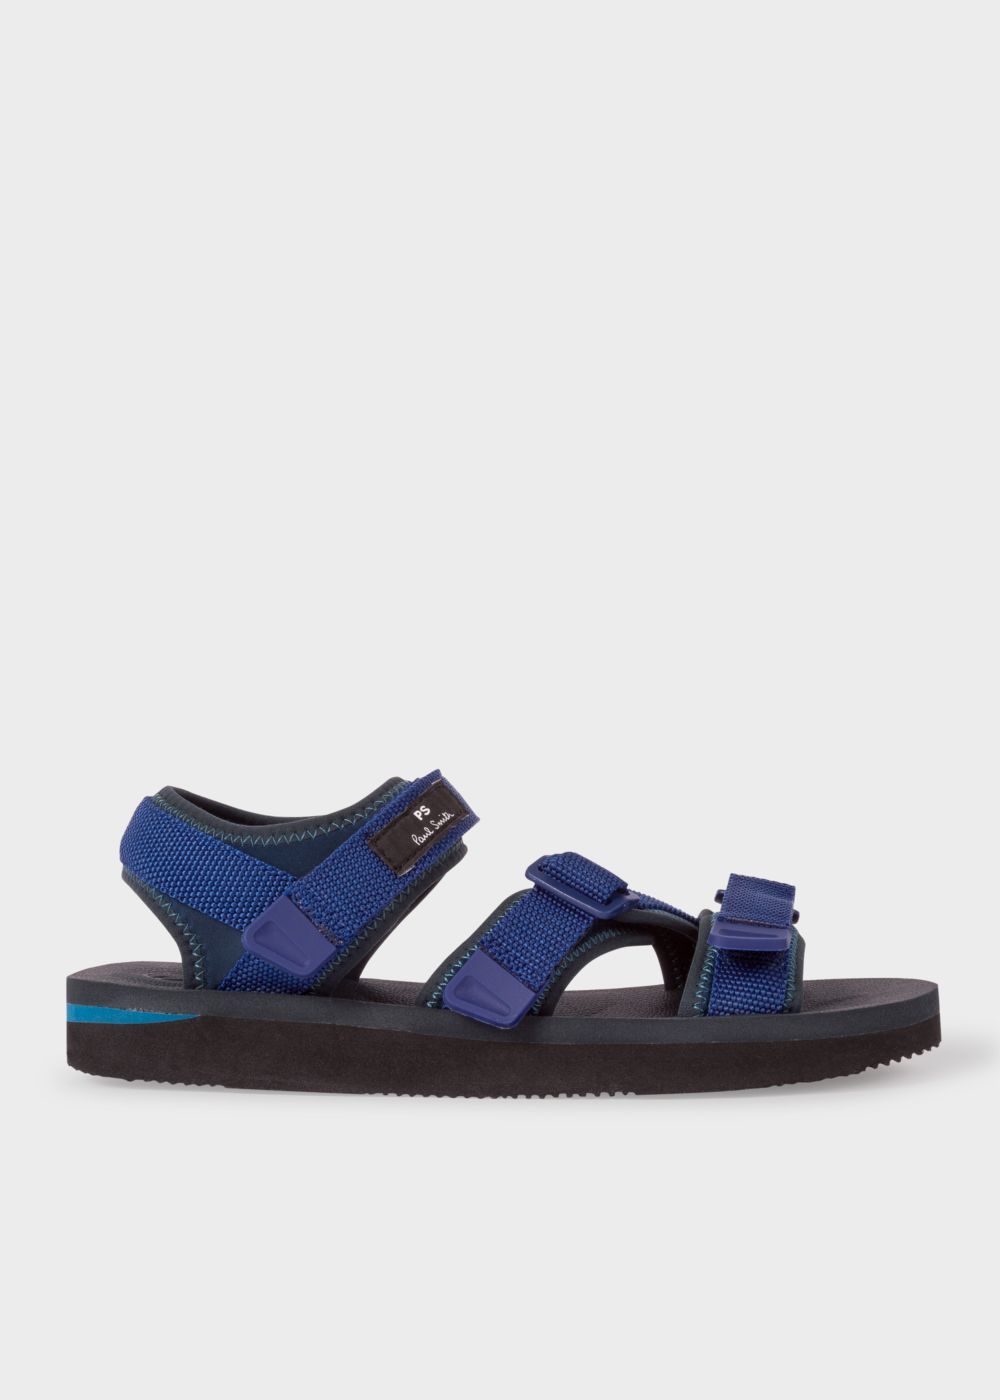 Paul Smith's Webbing Sandals Might be The Only Reason to Wear Sandals ...